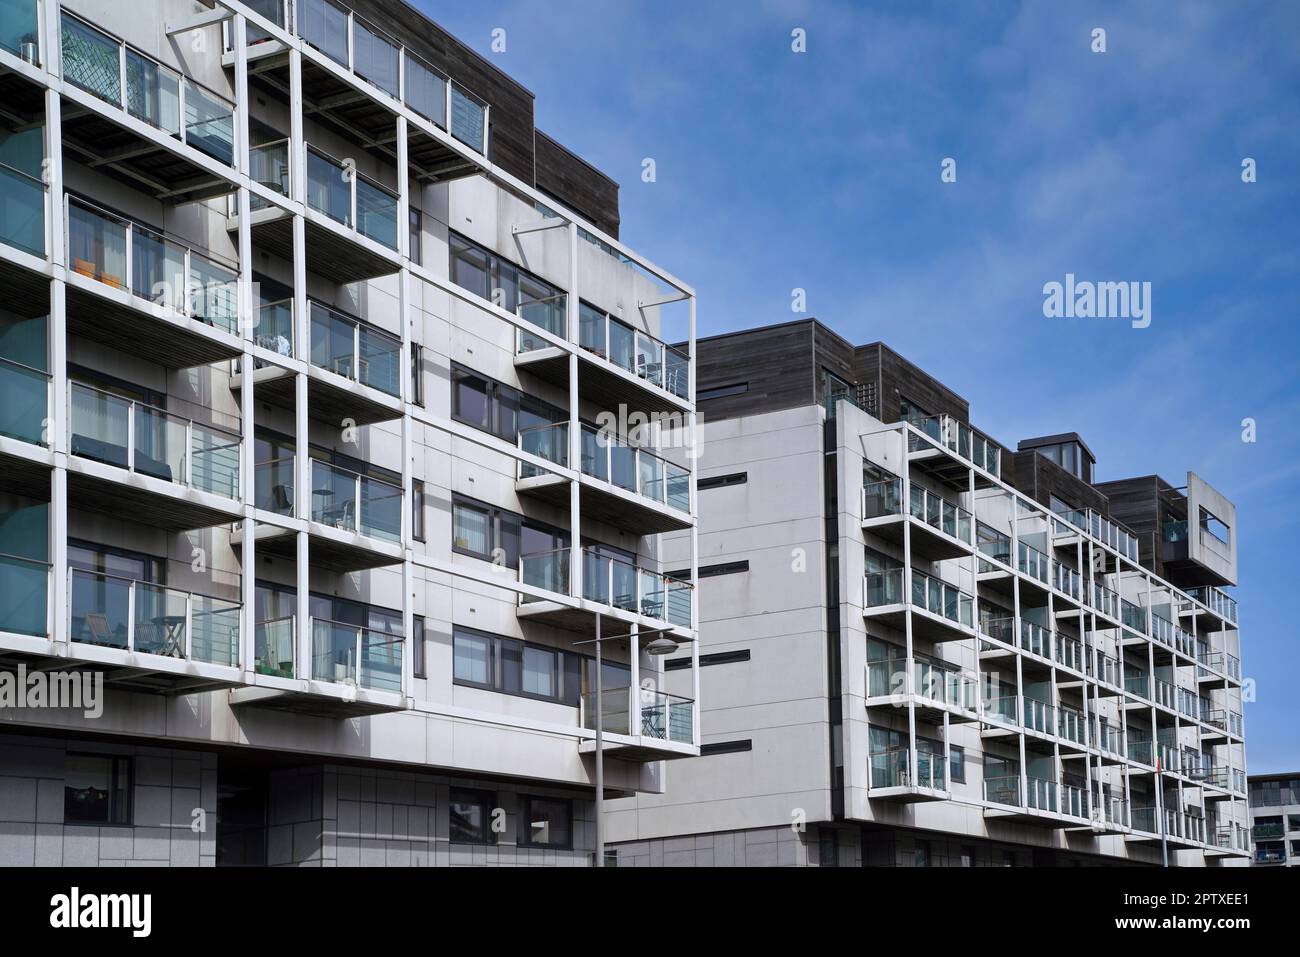 Street with modern low-rise apartment building Stock Photo